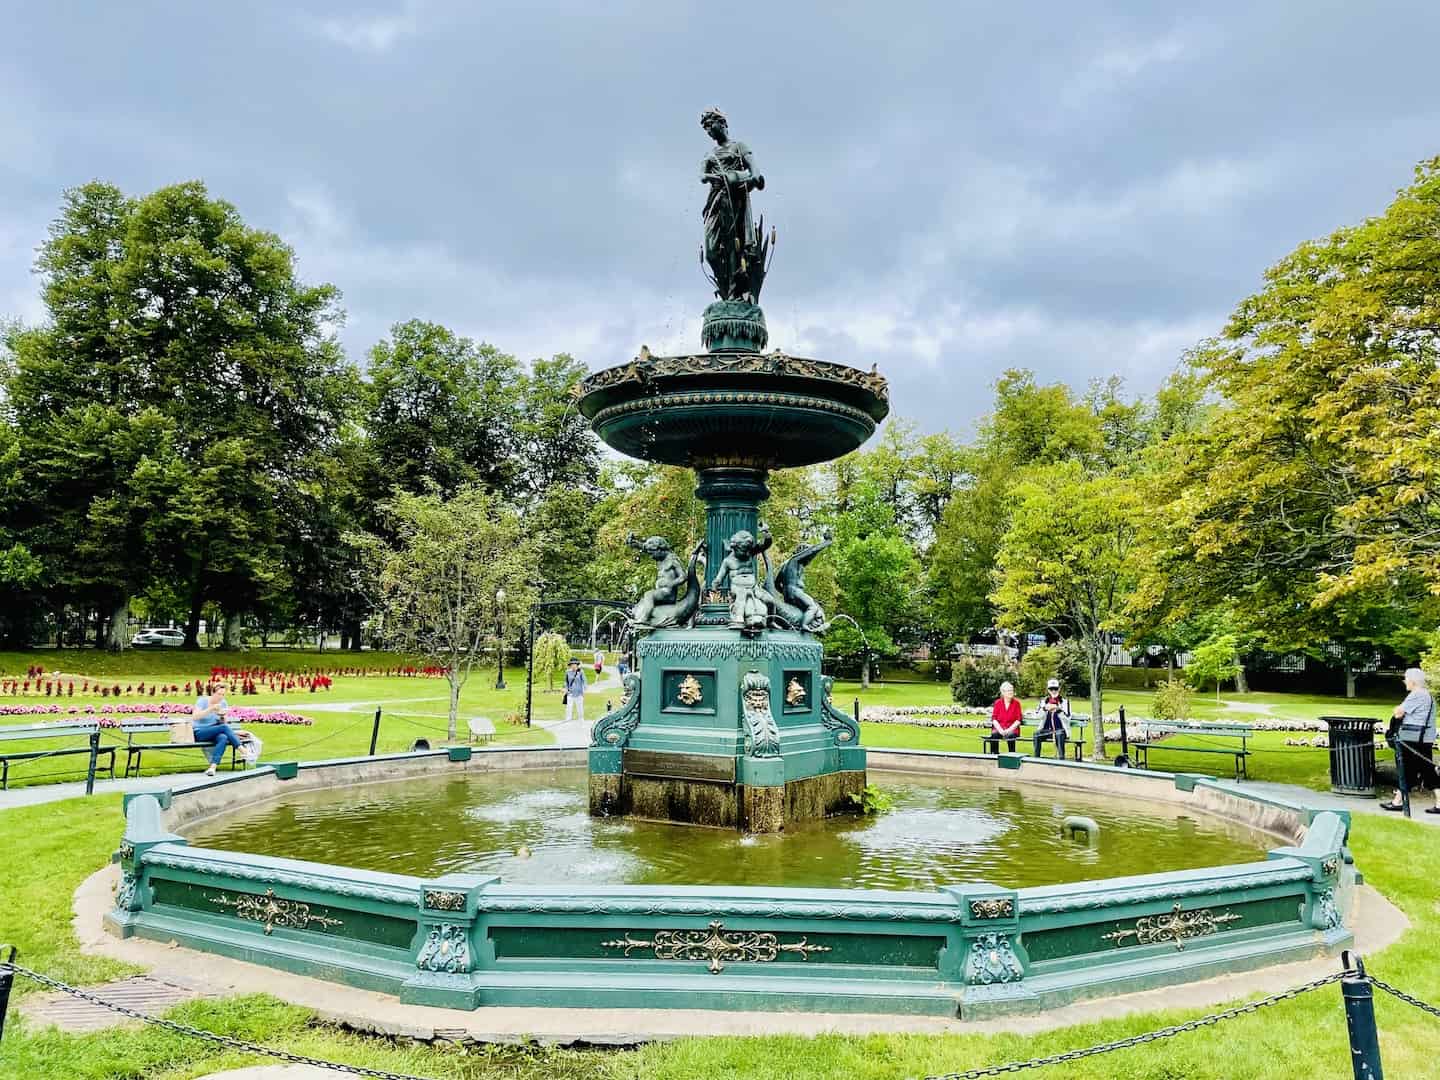 A large elaborately decorated water fountain is a focal point for visitors to the Halifax Public Gardens.